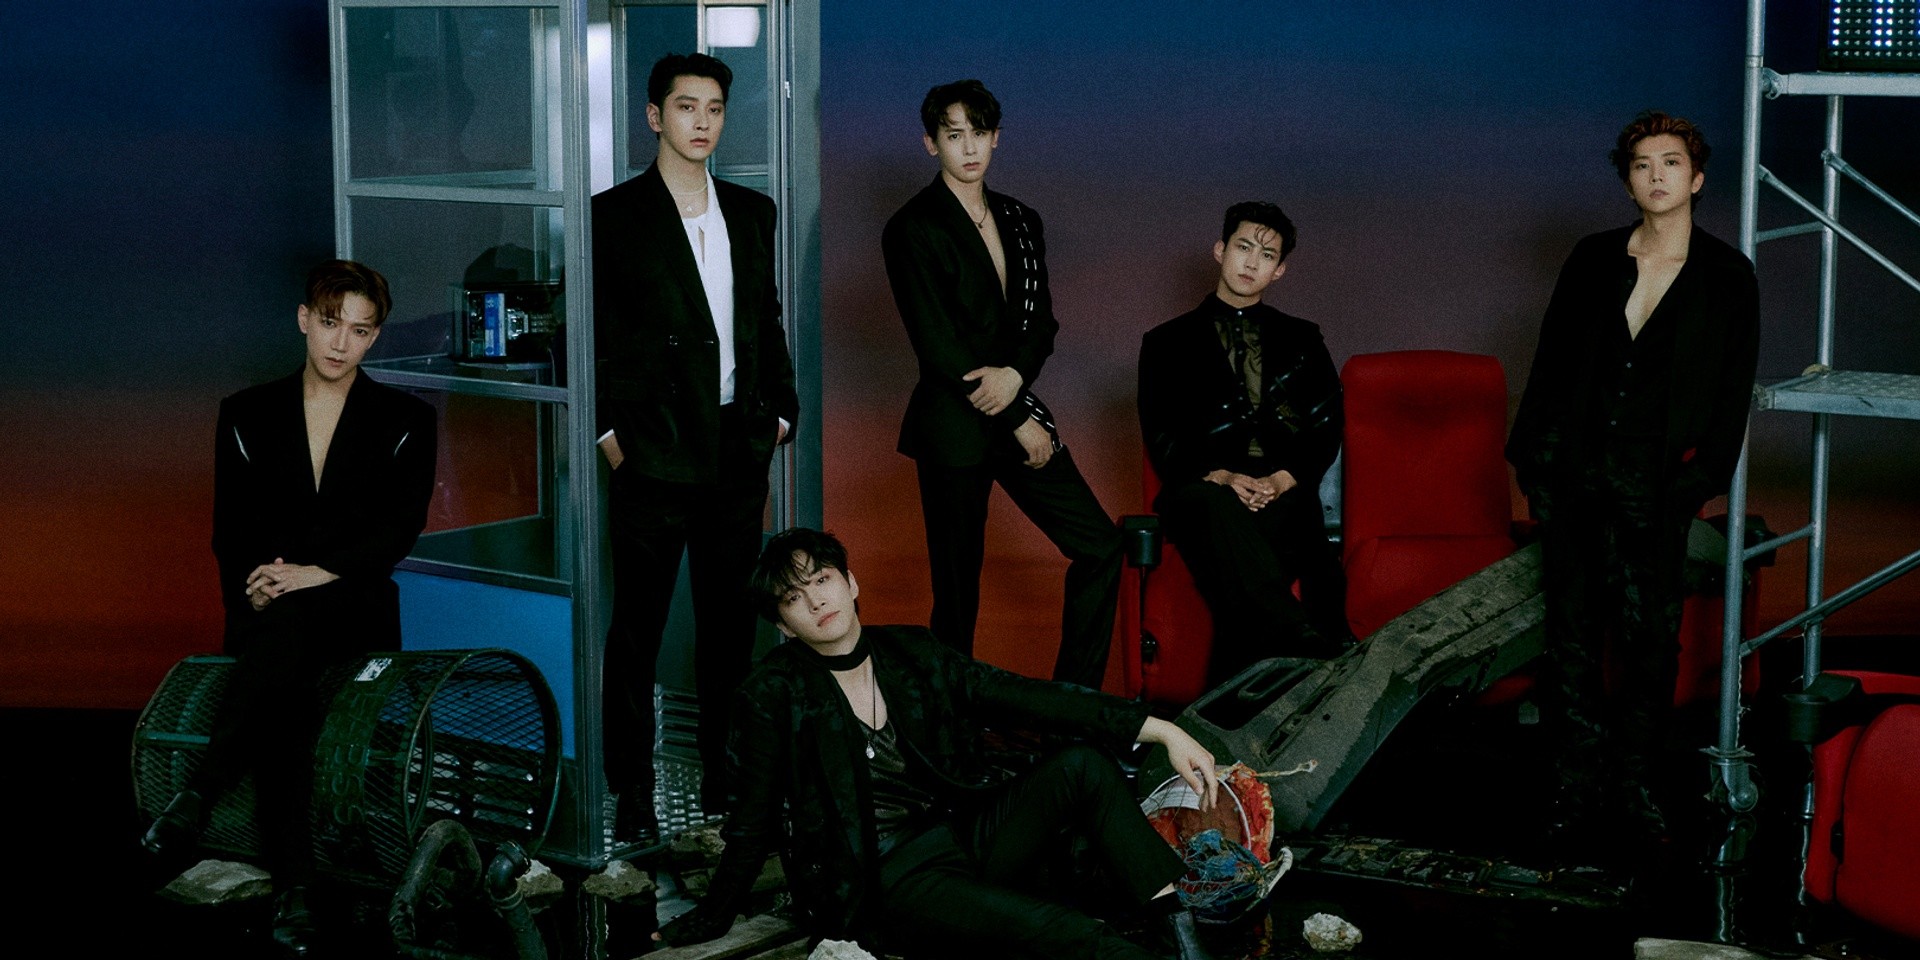 2PM reveal tracklist for new album, 'MUST' 